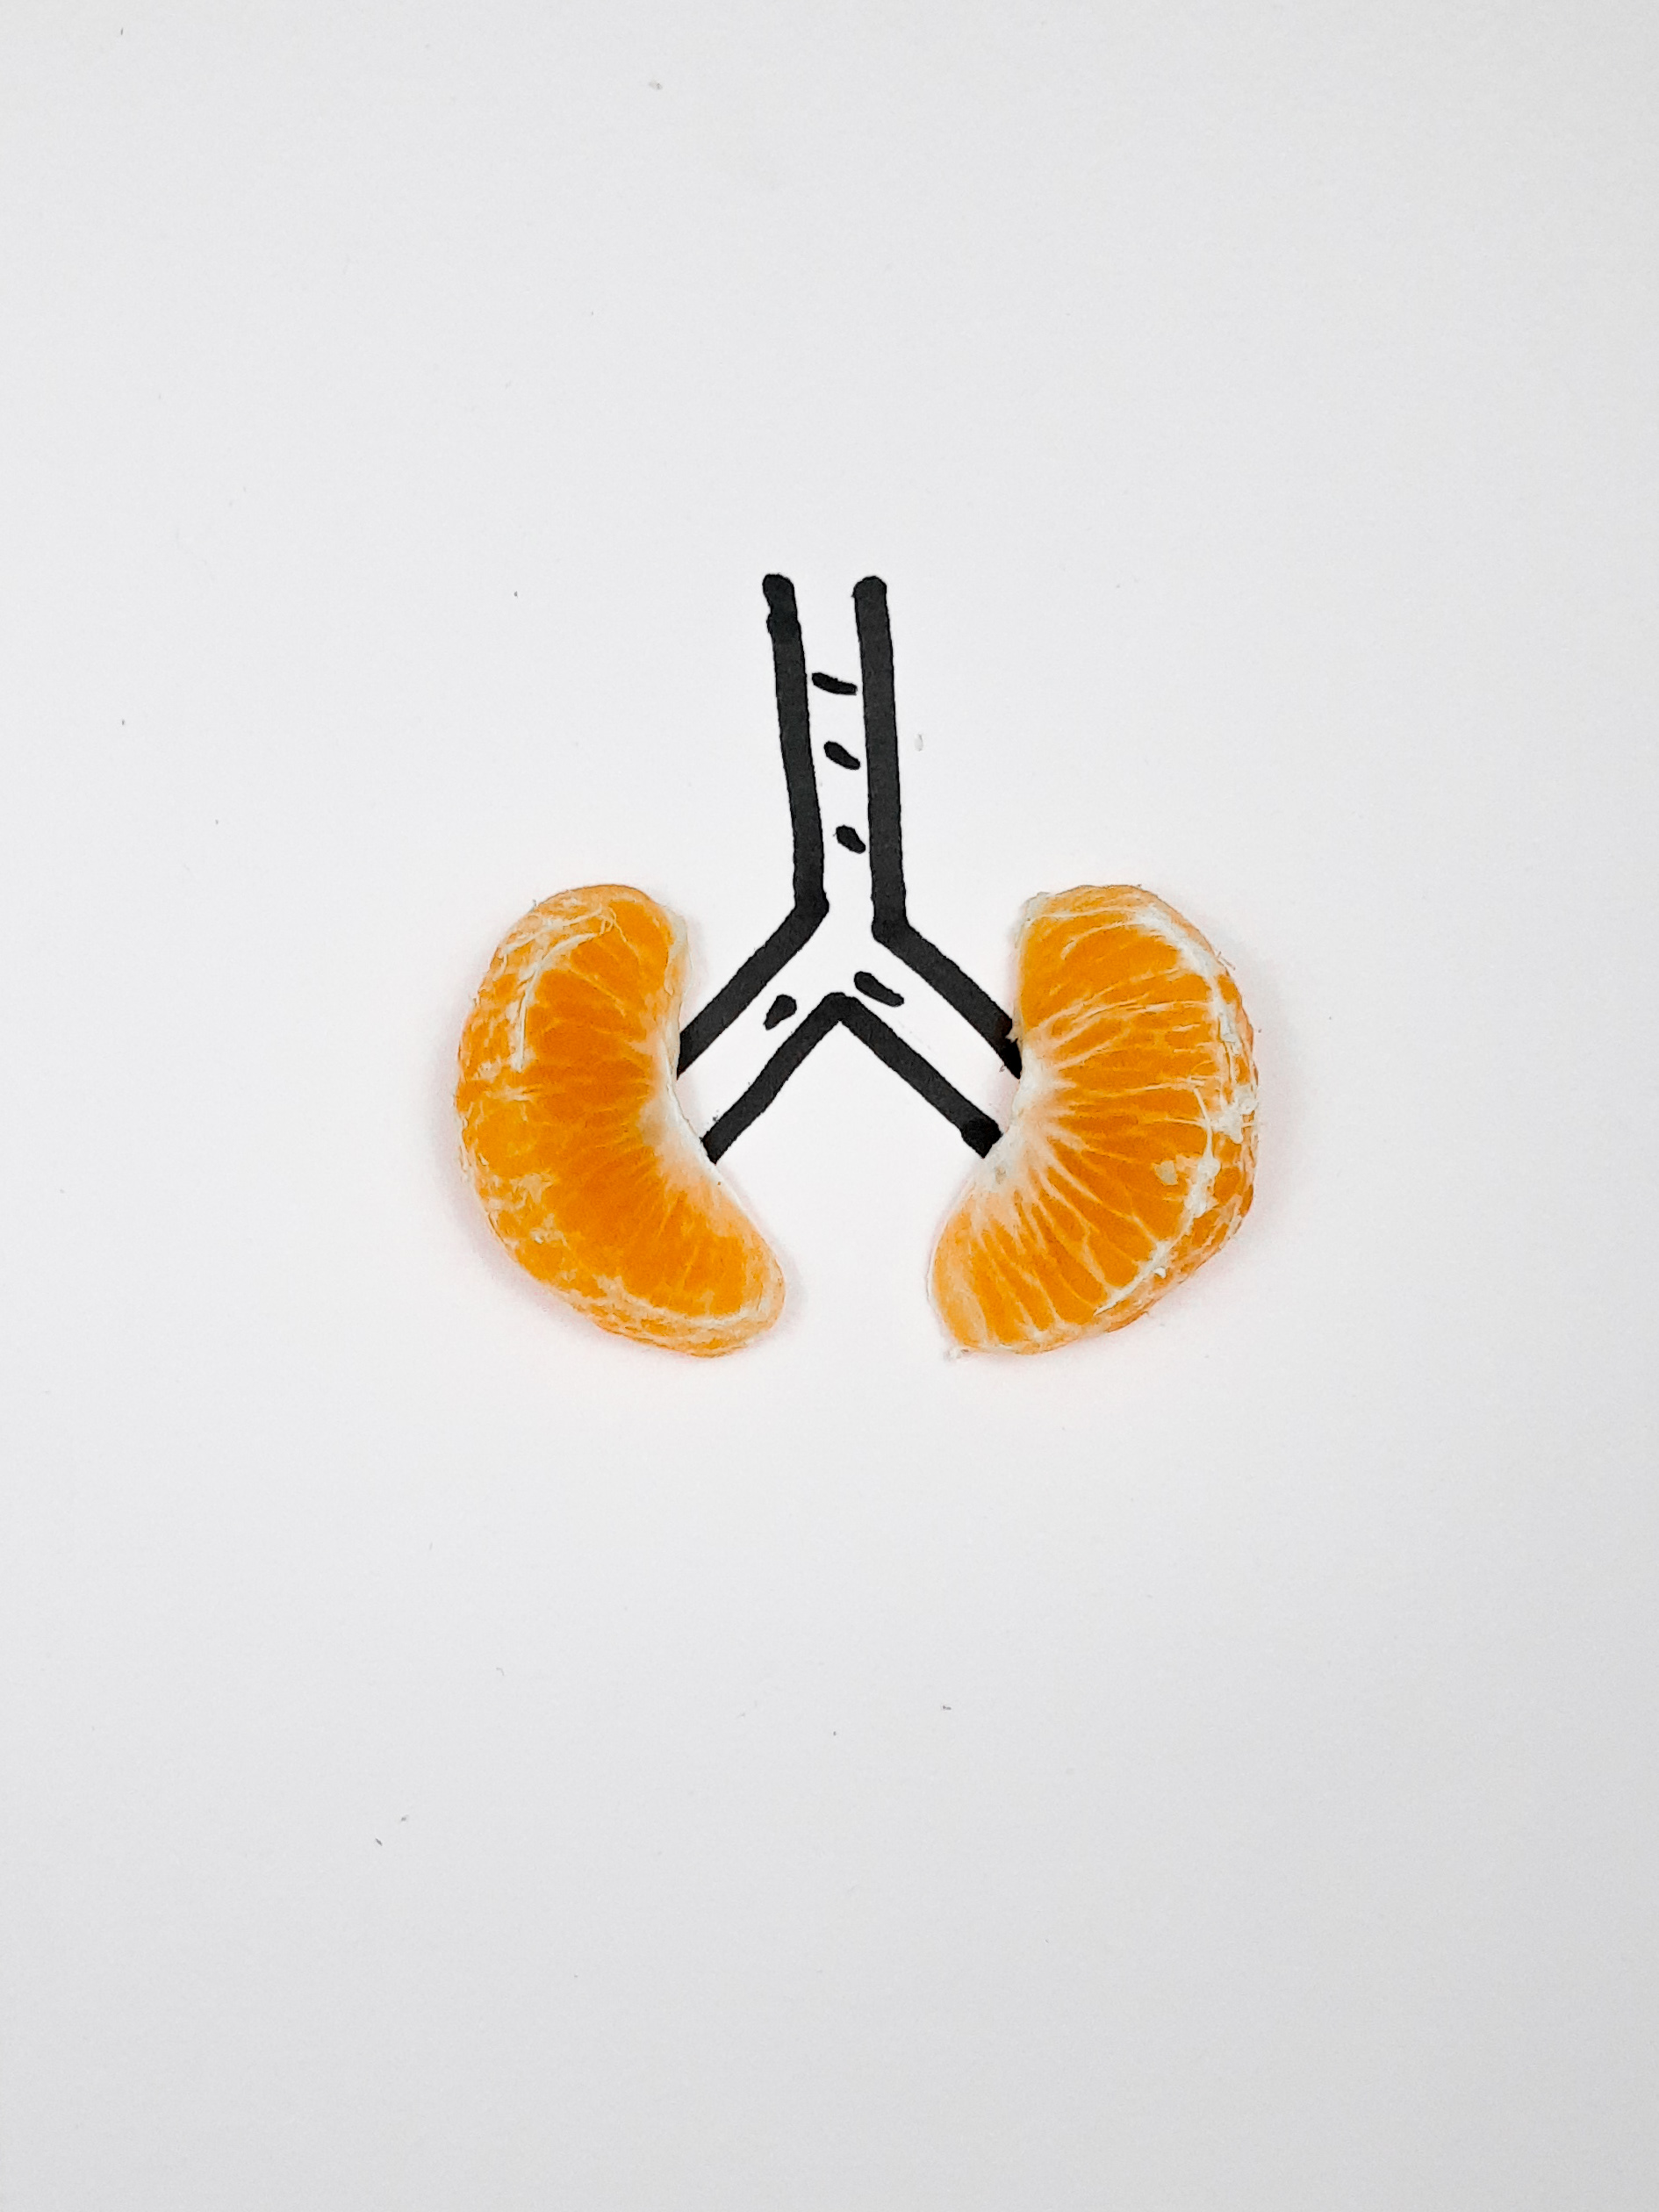 Orange for Lungs Health